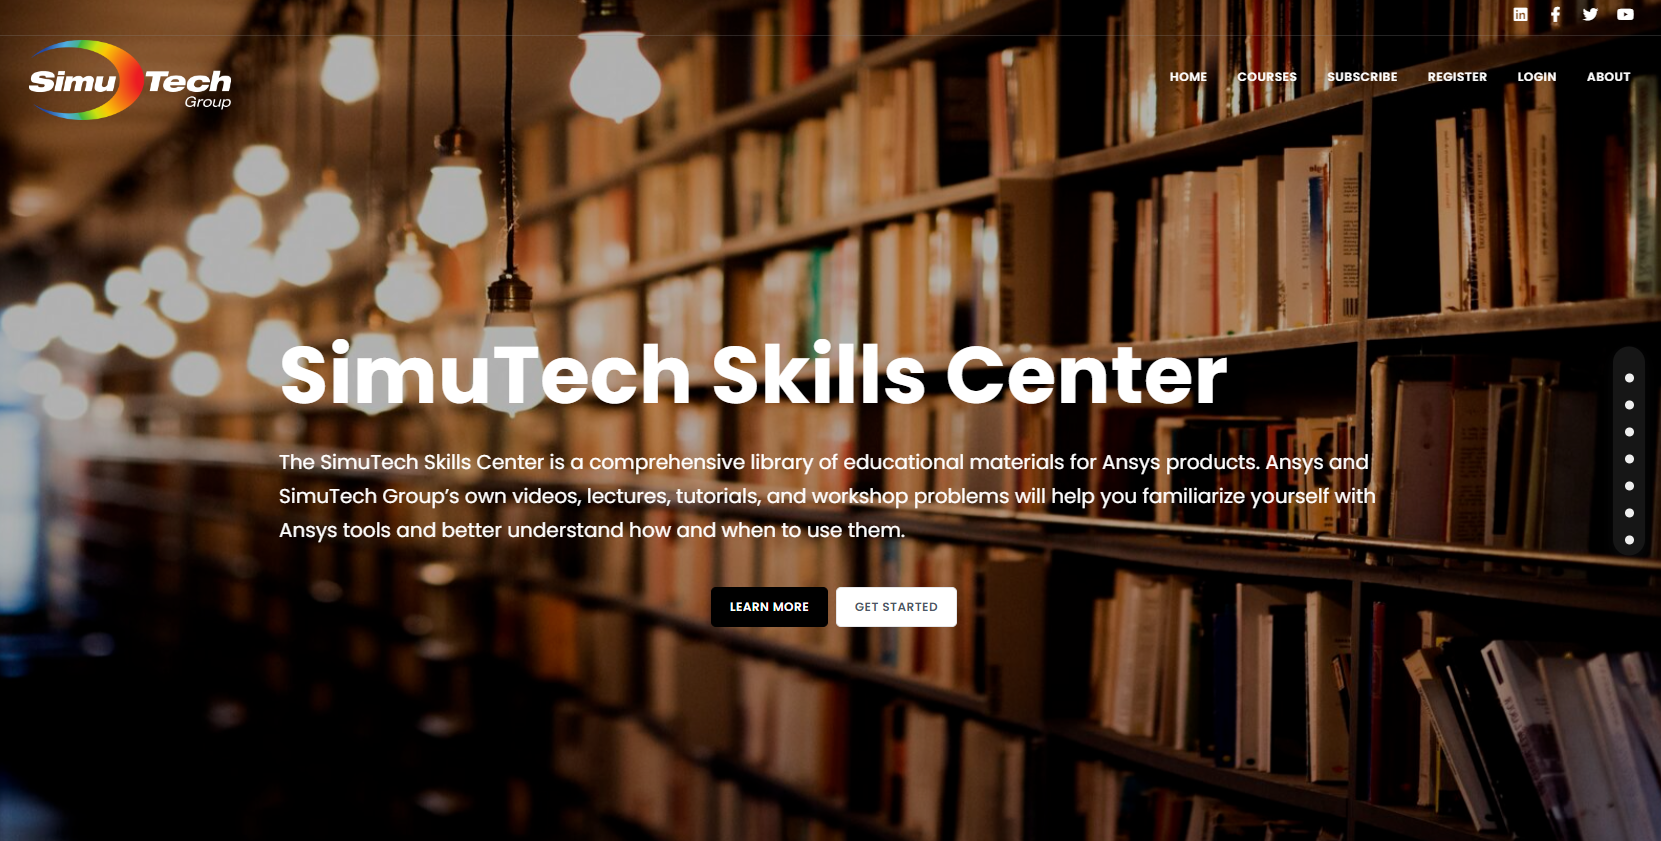 The SimuTech Skills Center is a 24/7 online tool that connects you to self-paced support and resources. Whether you are a beginner looking for support, or an advanced user seeking process improvements, we have the resources for you.